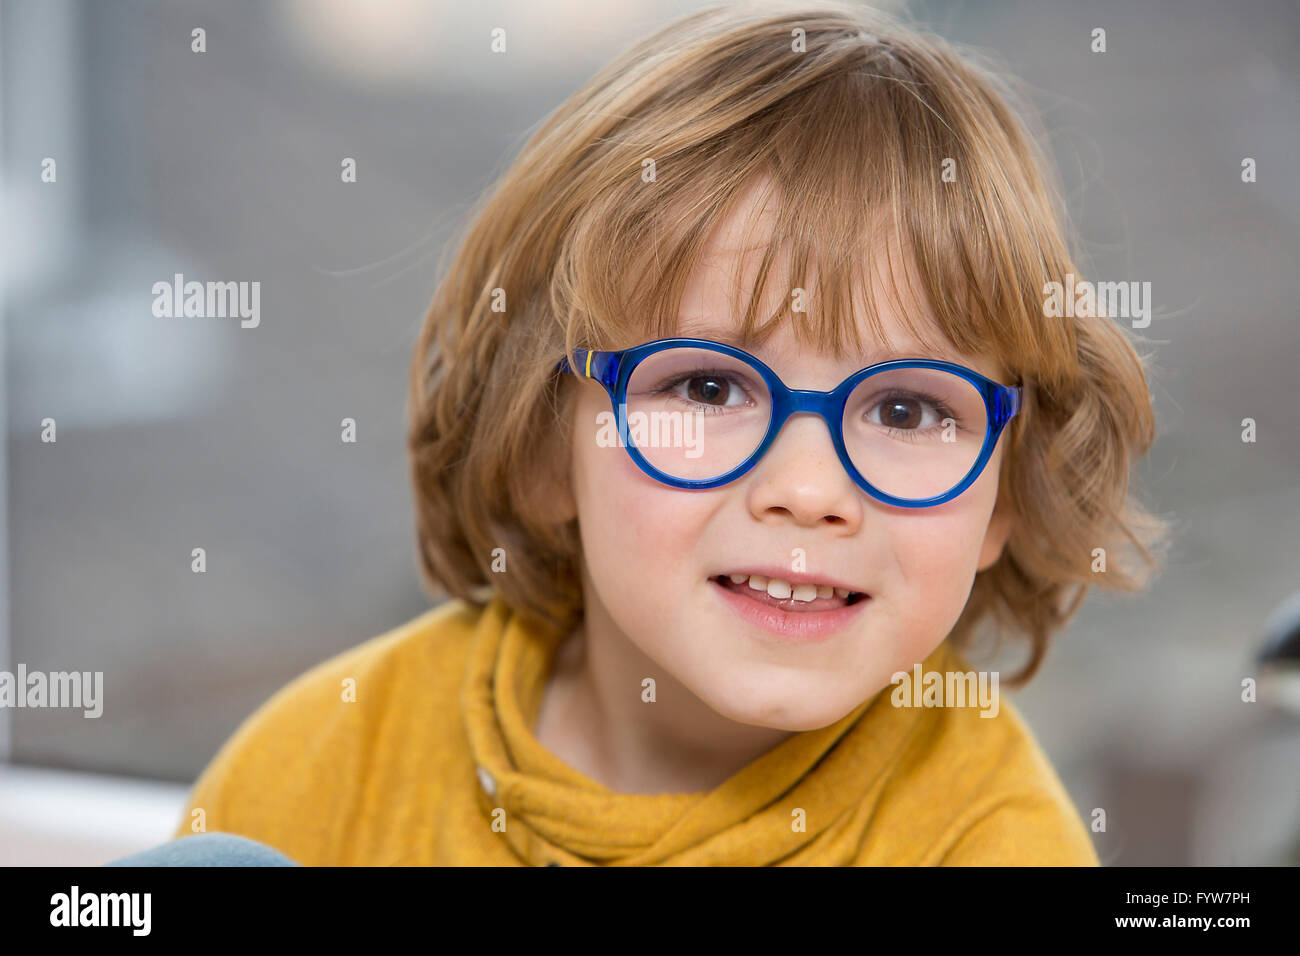 Young boy, 6 years old, looks friendly, smiles, with glasses, with a blue frame, Stock Photo